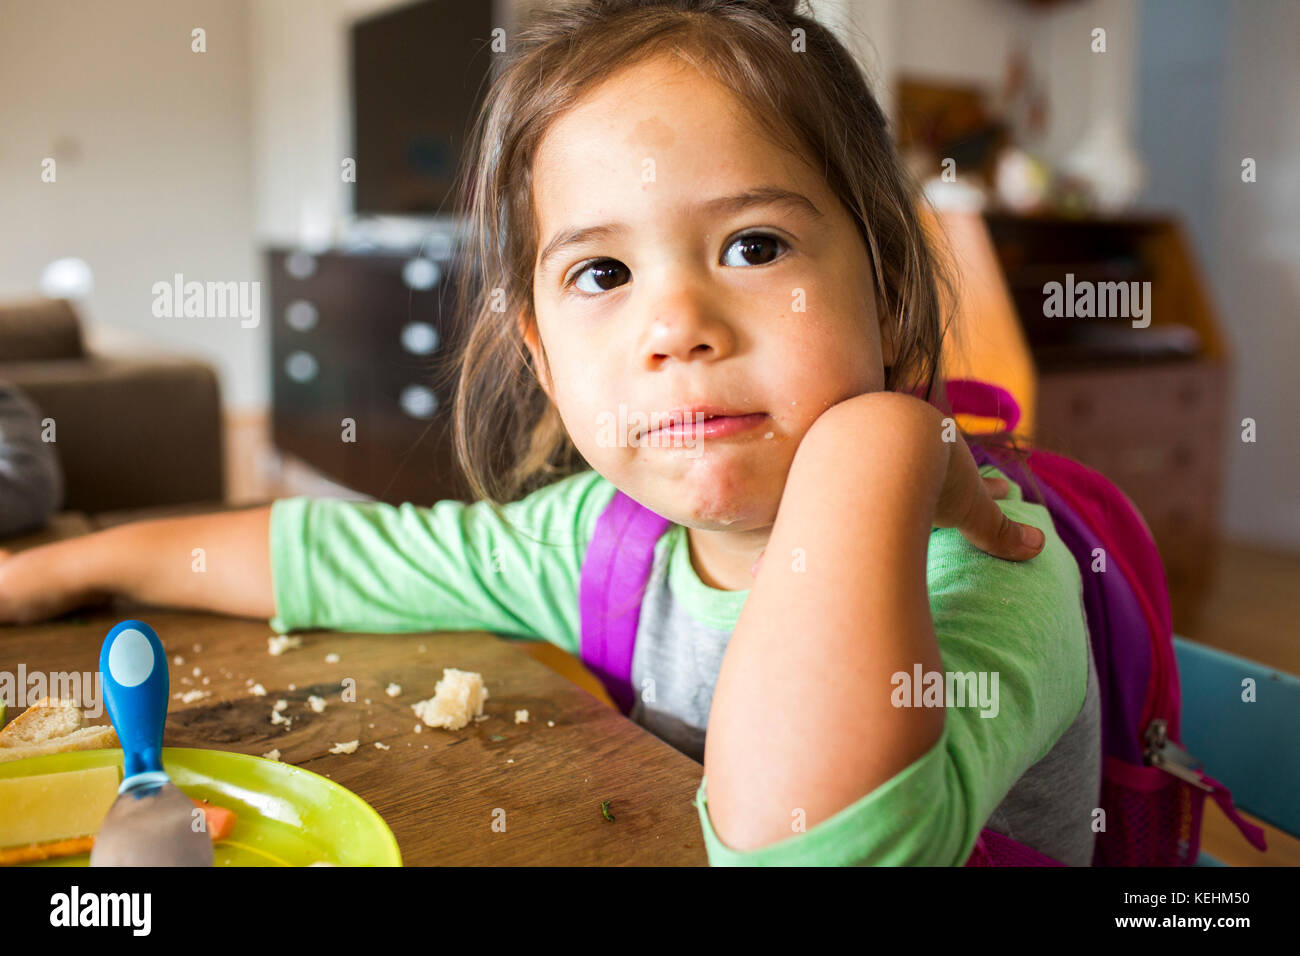 Messy mixed race girl eating food and wearing backpack at table Stock Photo